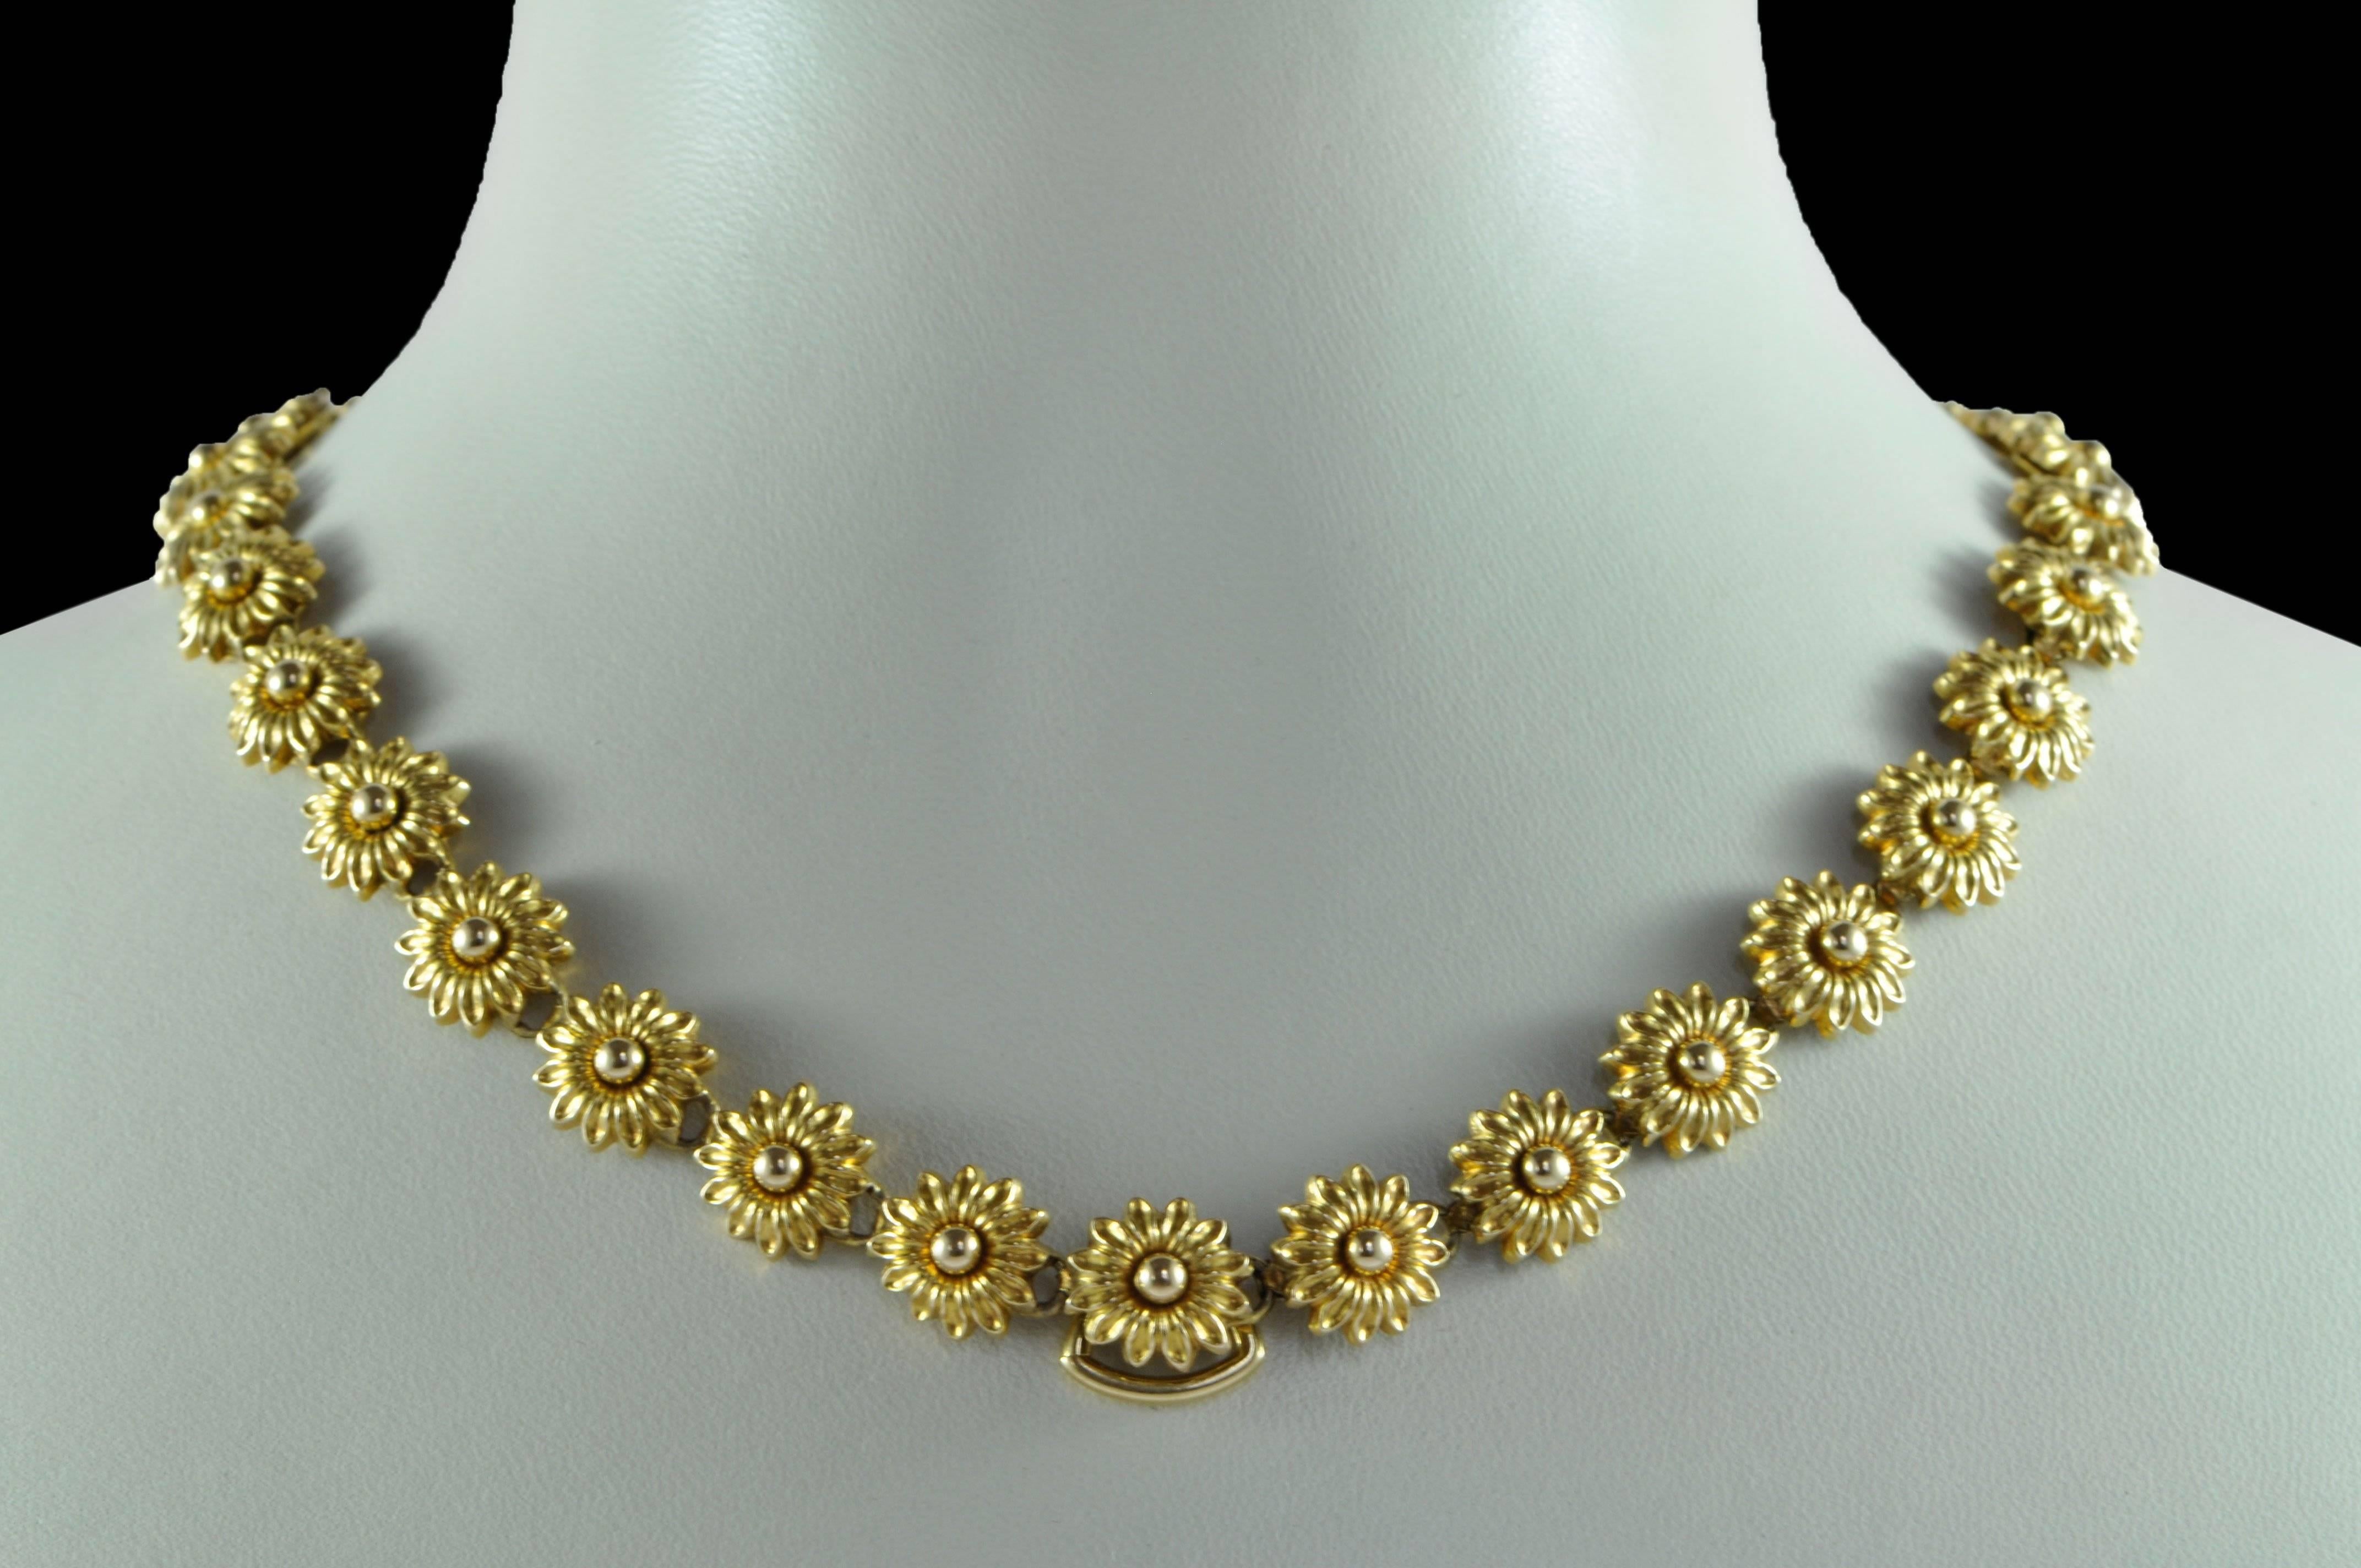 Antique gold daisy flower necklace, with stamped flower links.